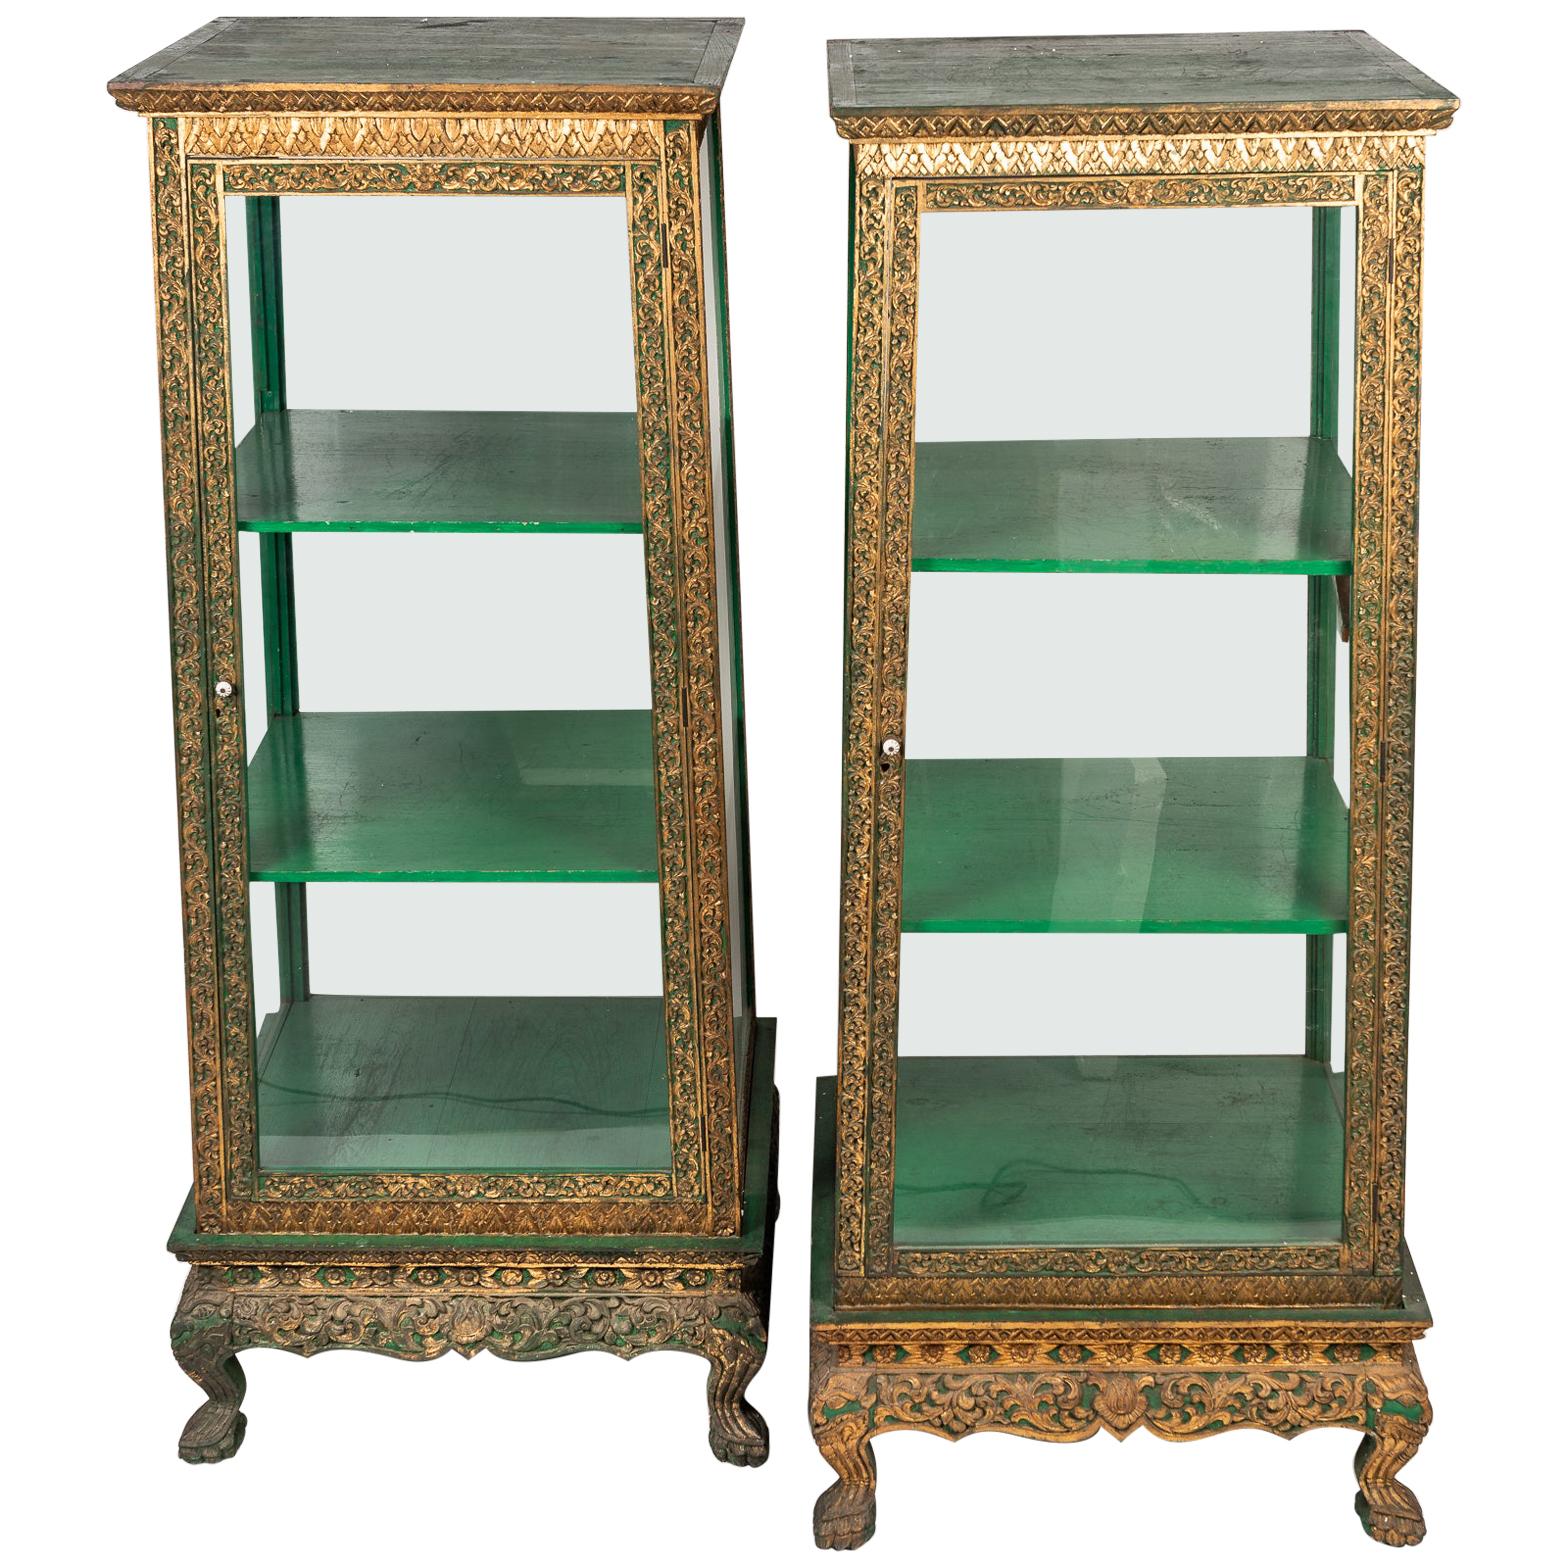 Pair of Rare Antique Glas Cabinets from Thailand